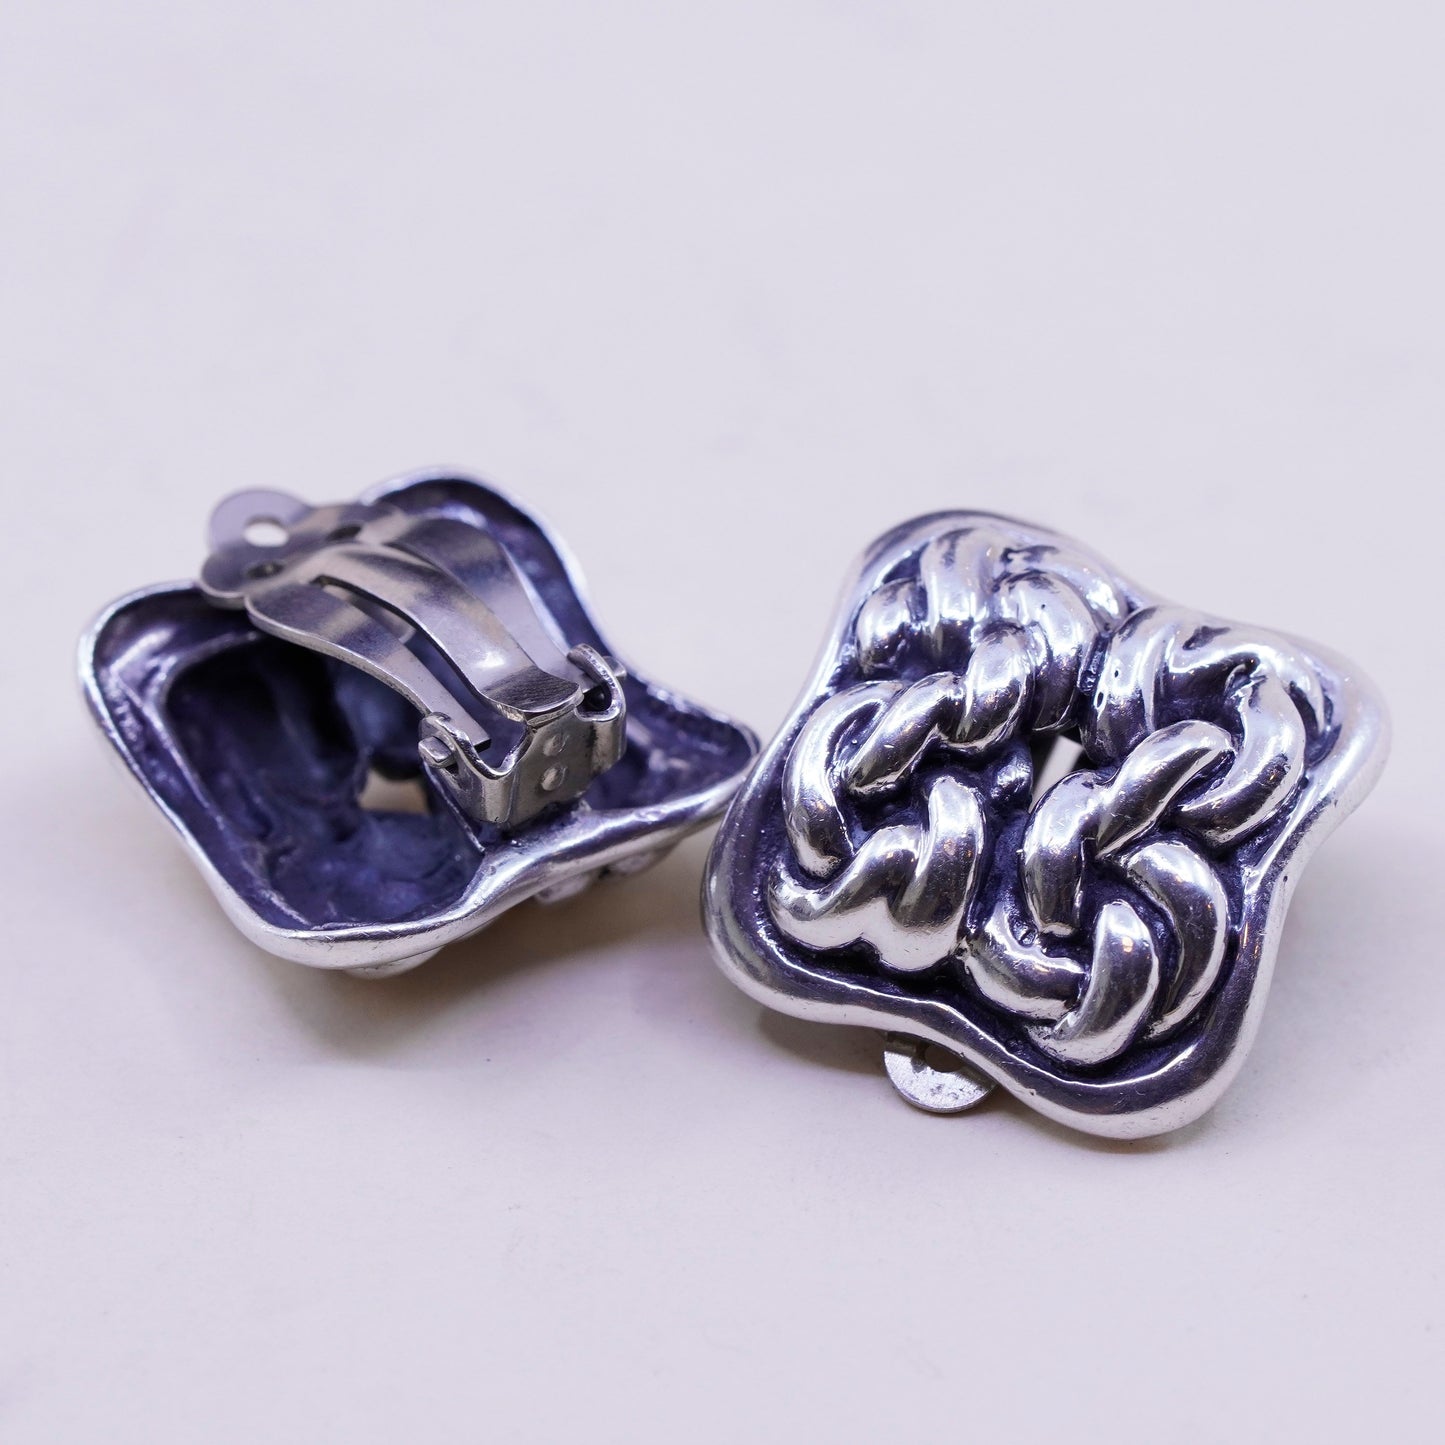 Vintage Sterling silver clip on earrings, cable textured 925 silver